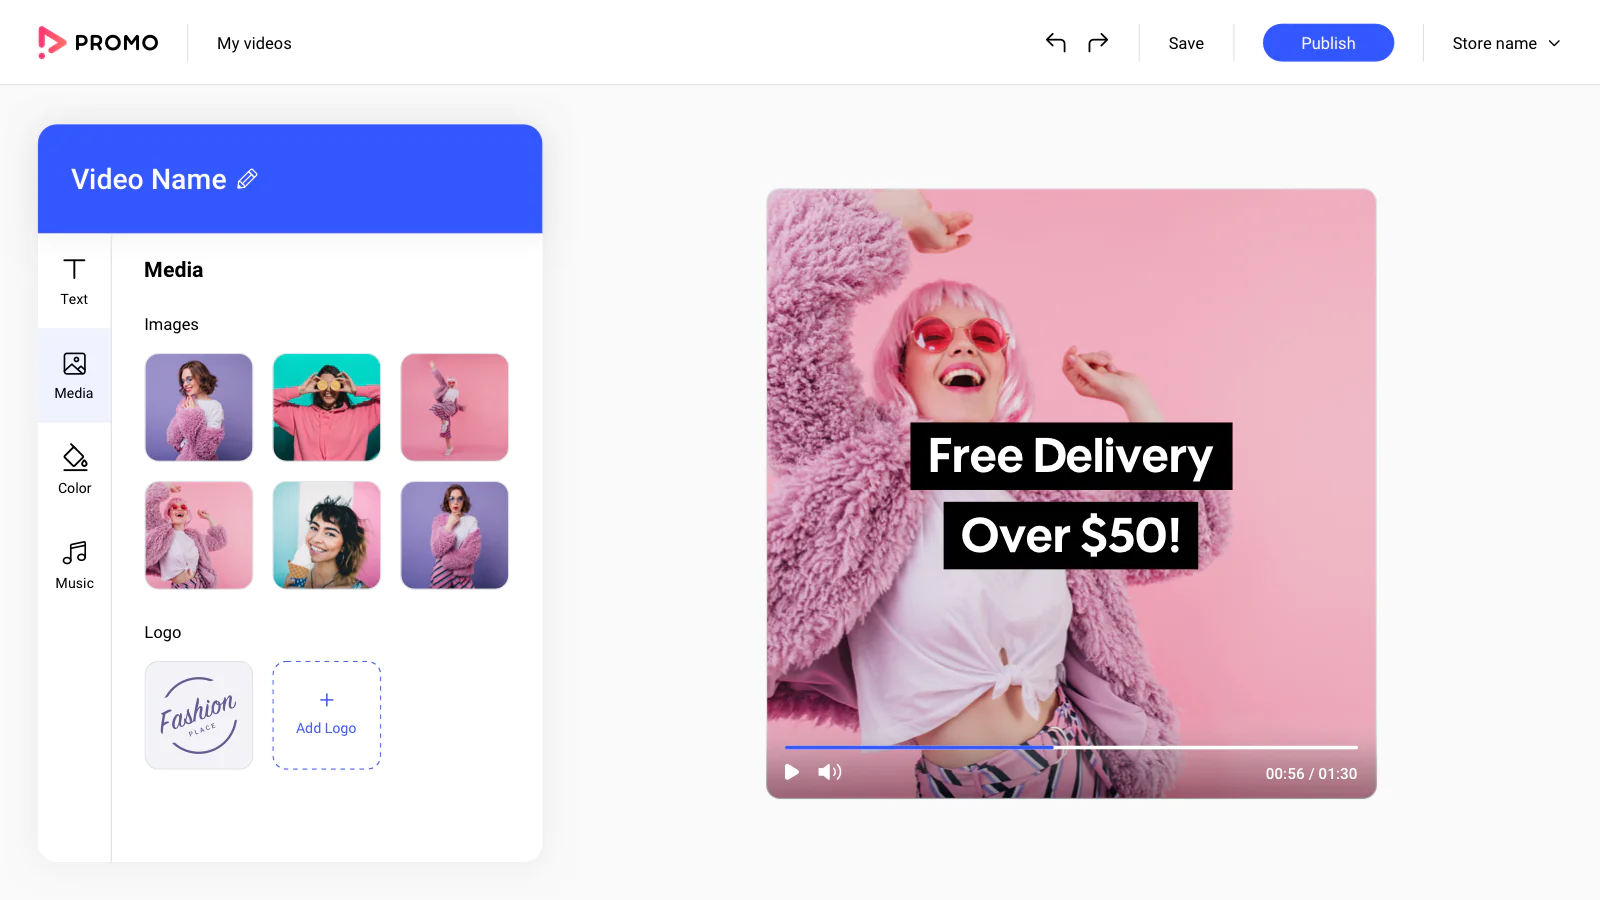 Demo of Promo Video Maker app for Shopify stores